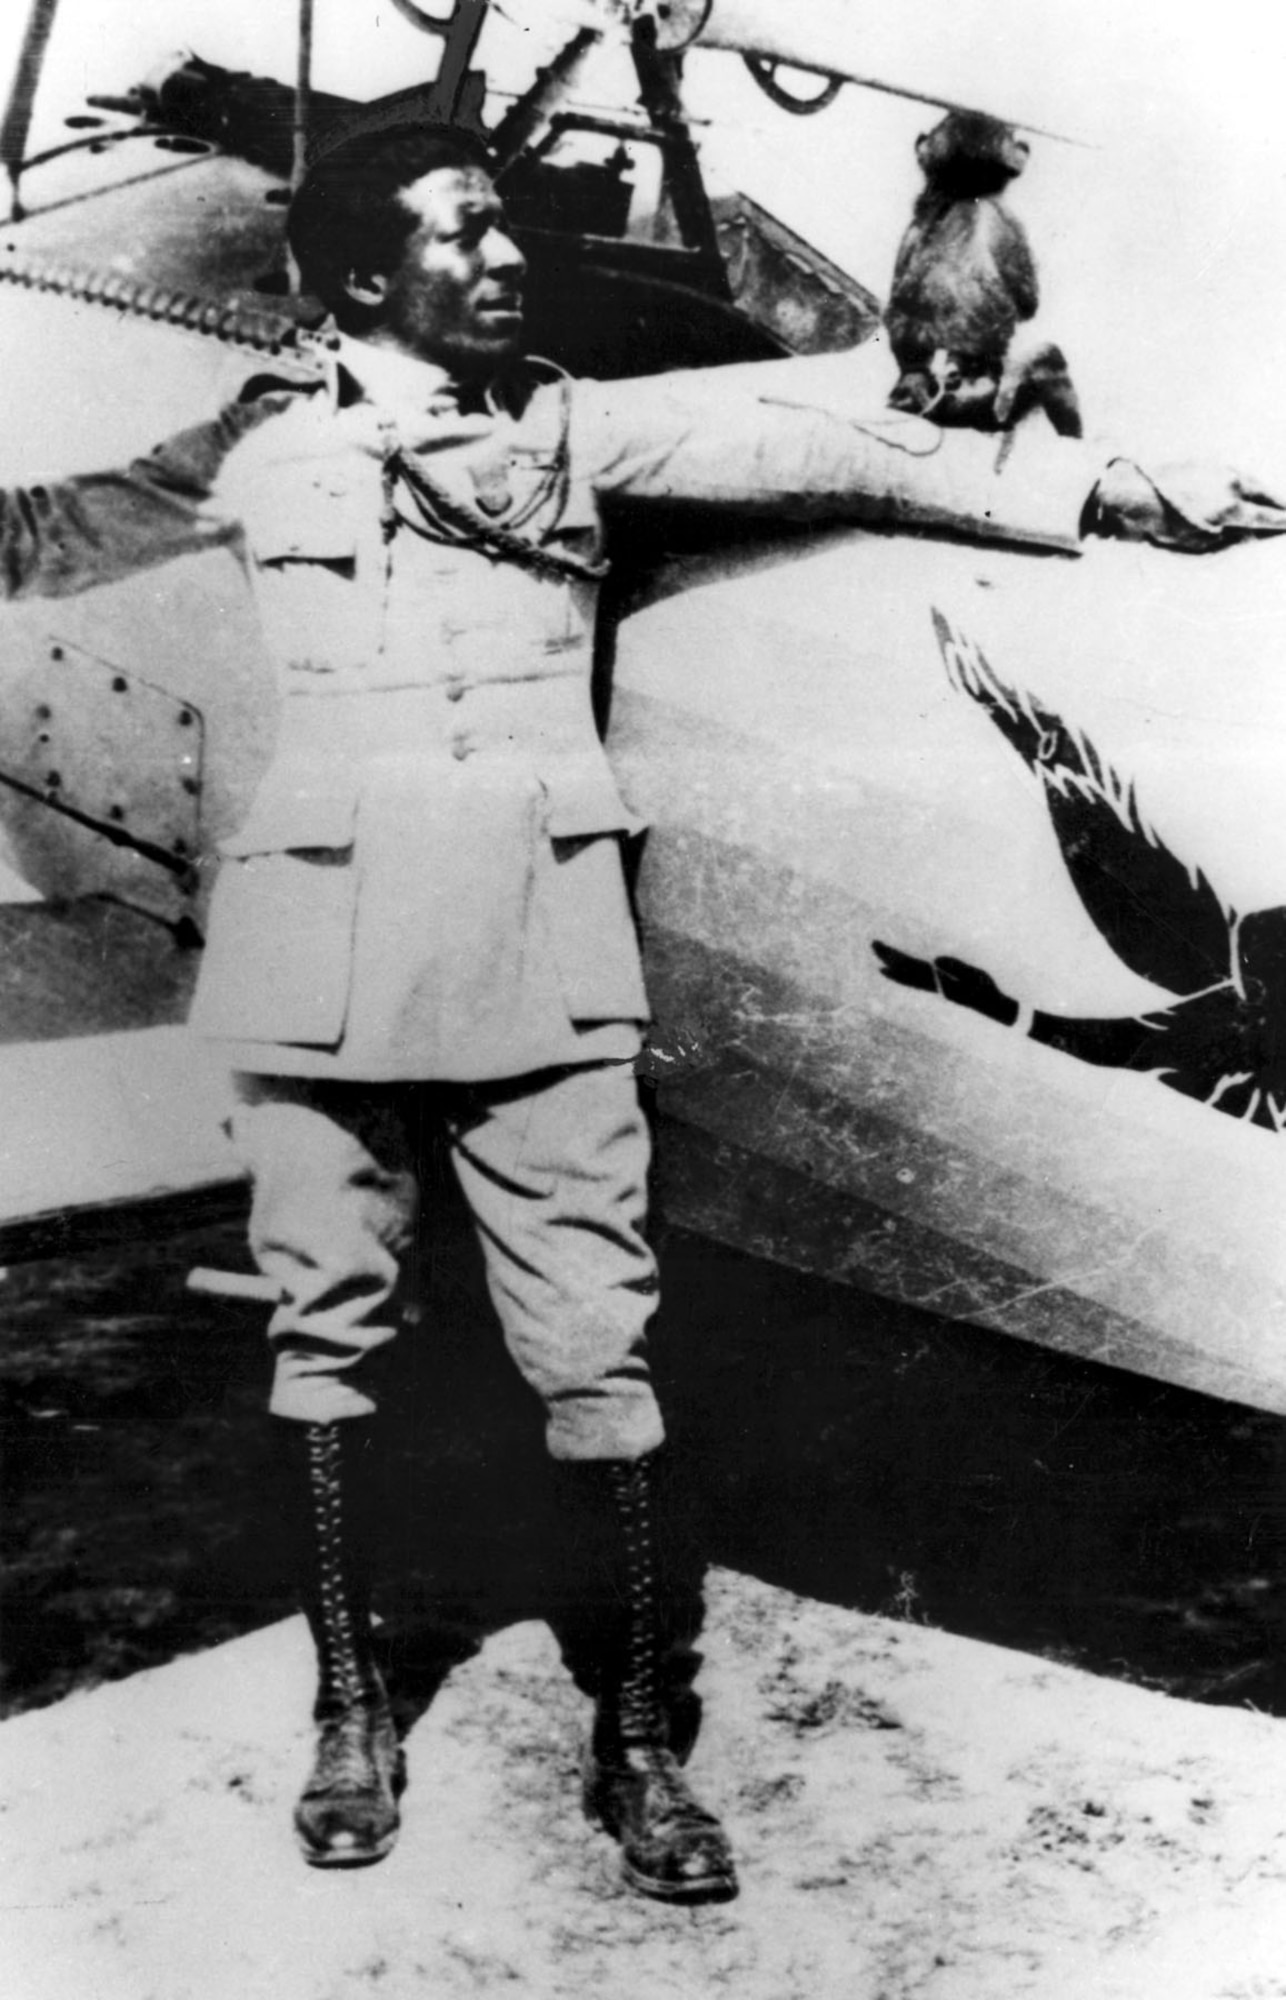 Eugene Bullard became the first African-American combat pilot, credited with two unofficial kills during World War I as part of the French Flying Corps.